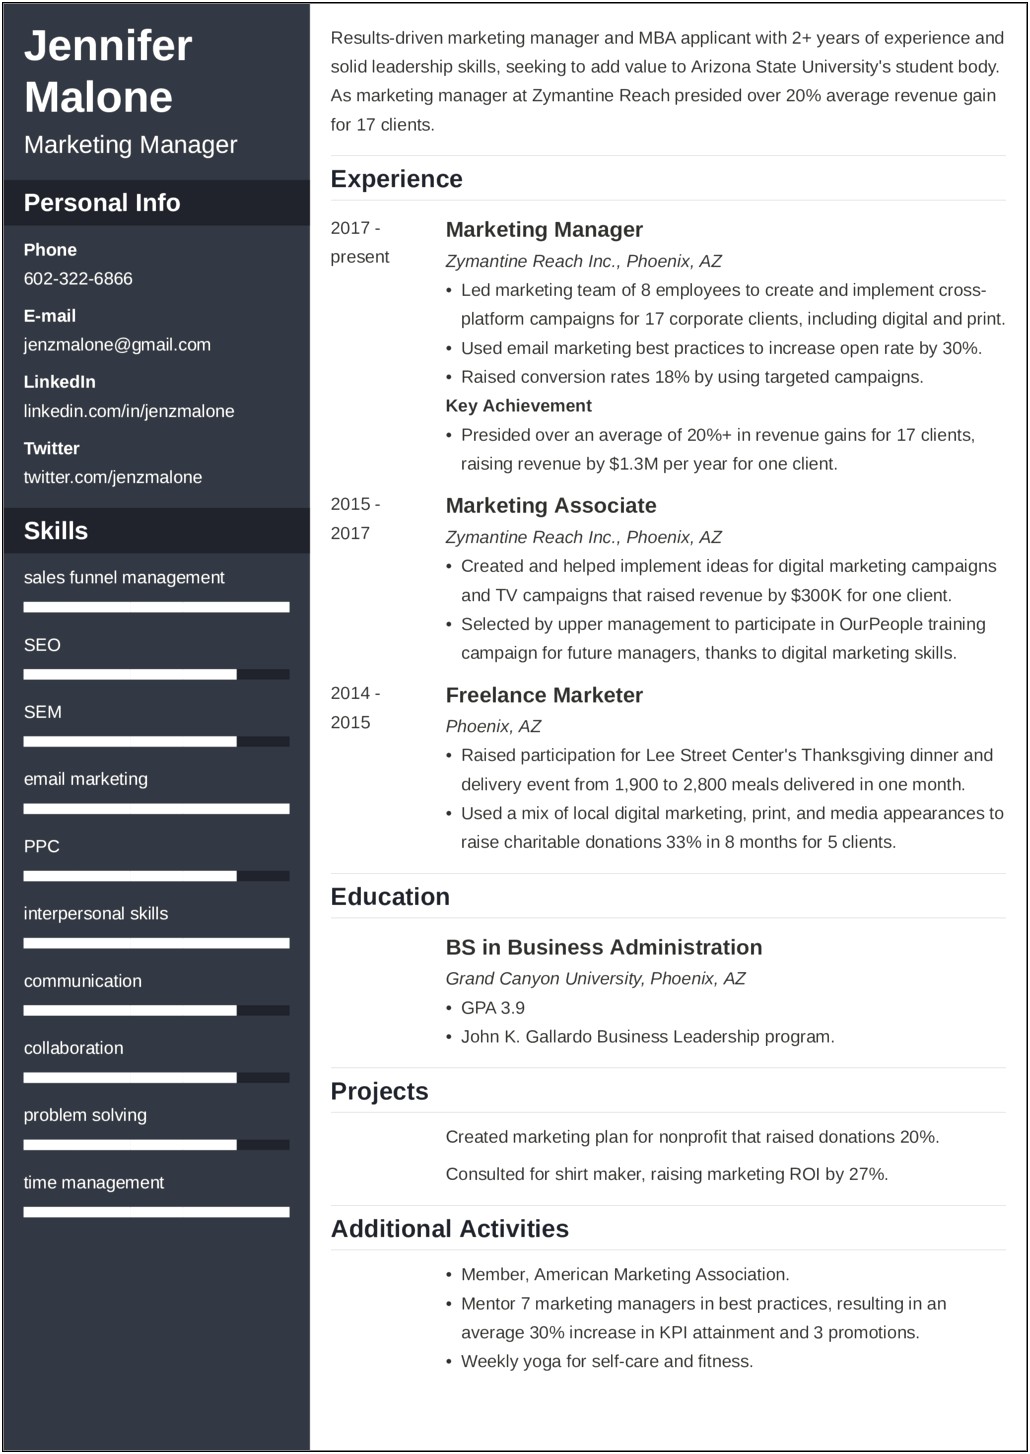 Objective In Resume For Freshers Mba